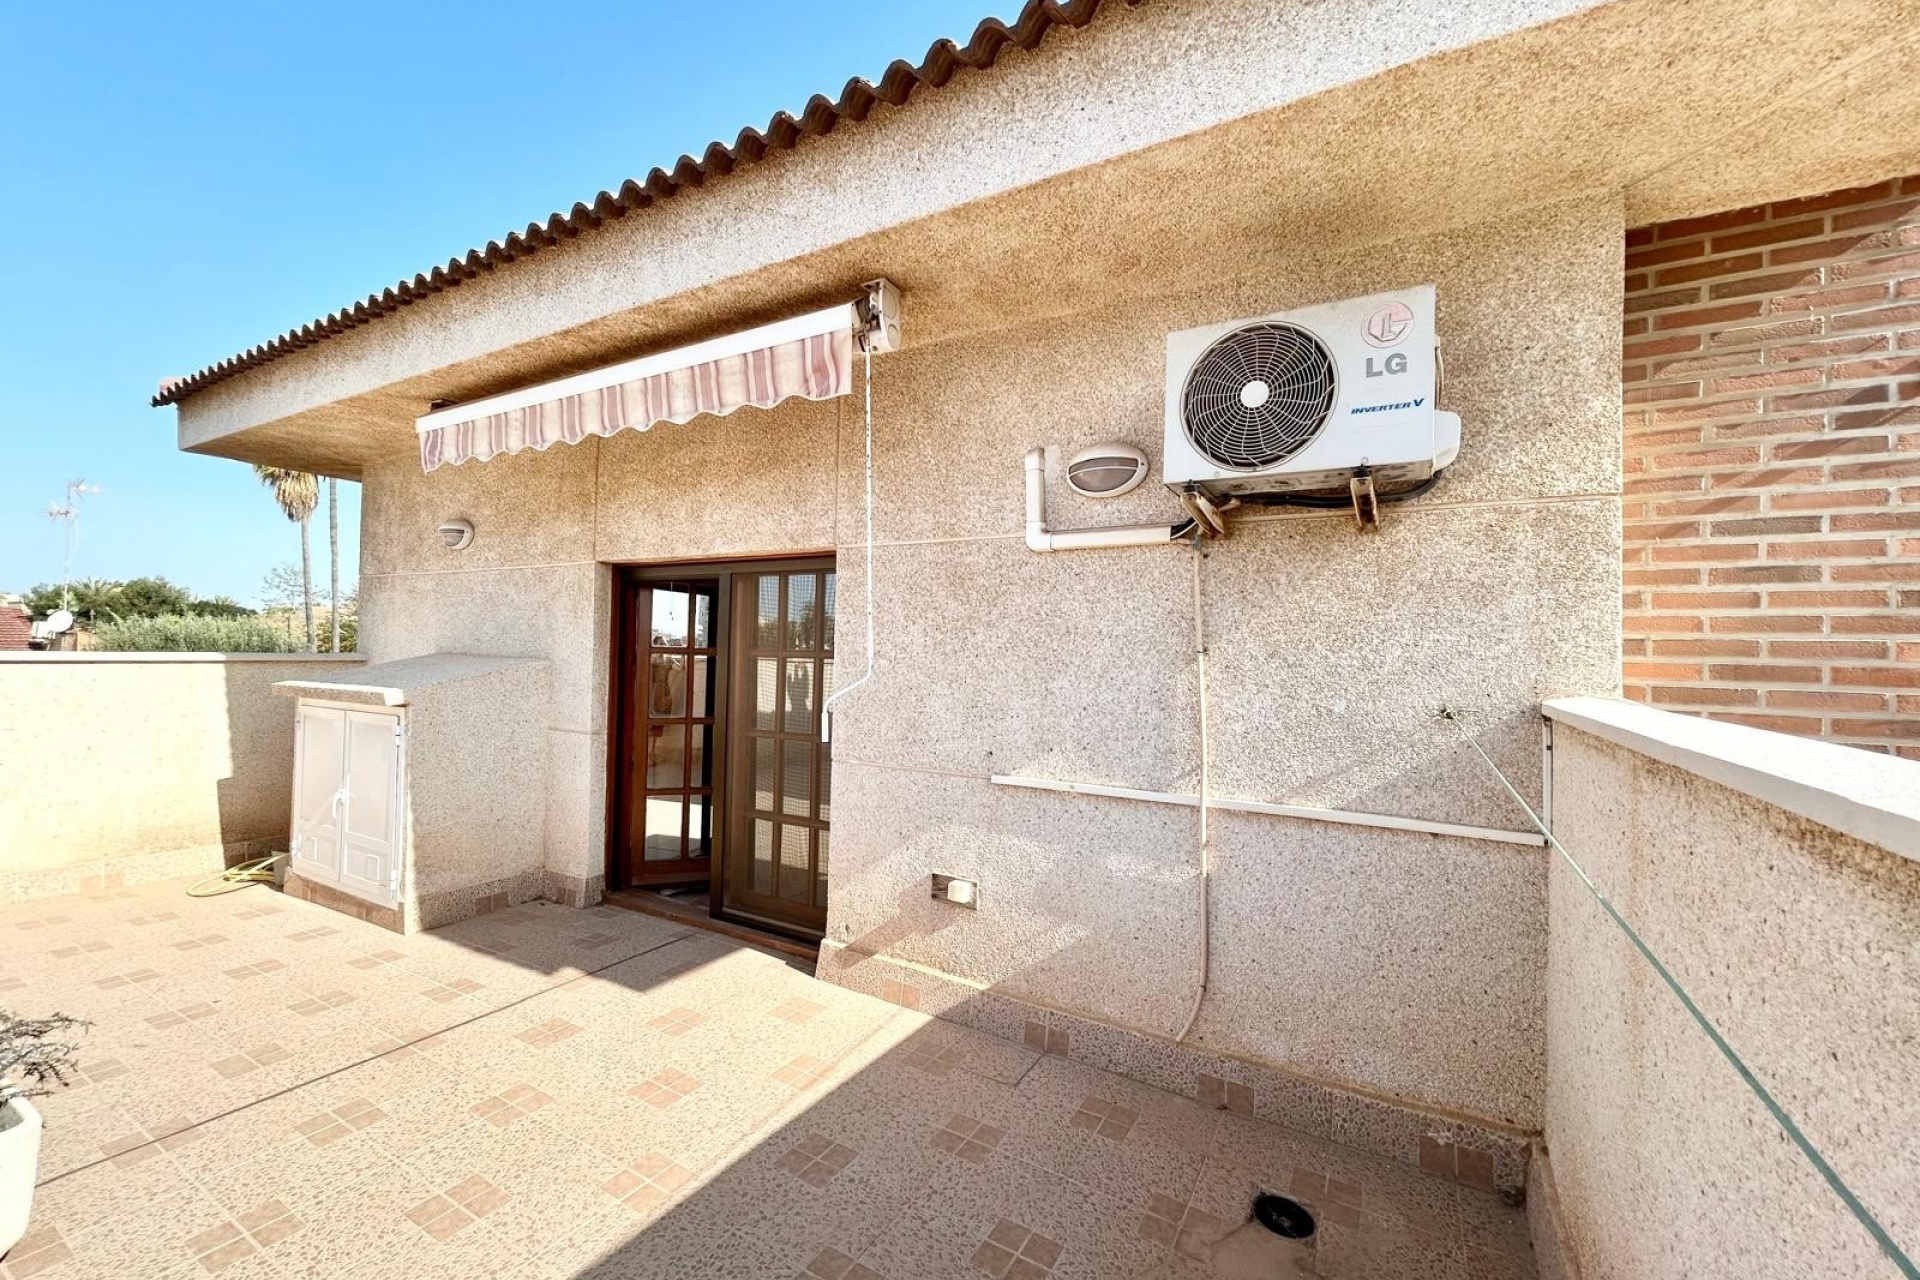 Property on Hold - Villa for sale - Torrevieja - Torrevieja Town Centre